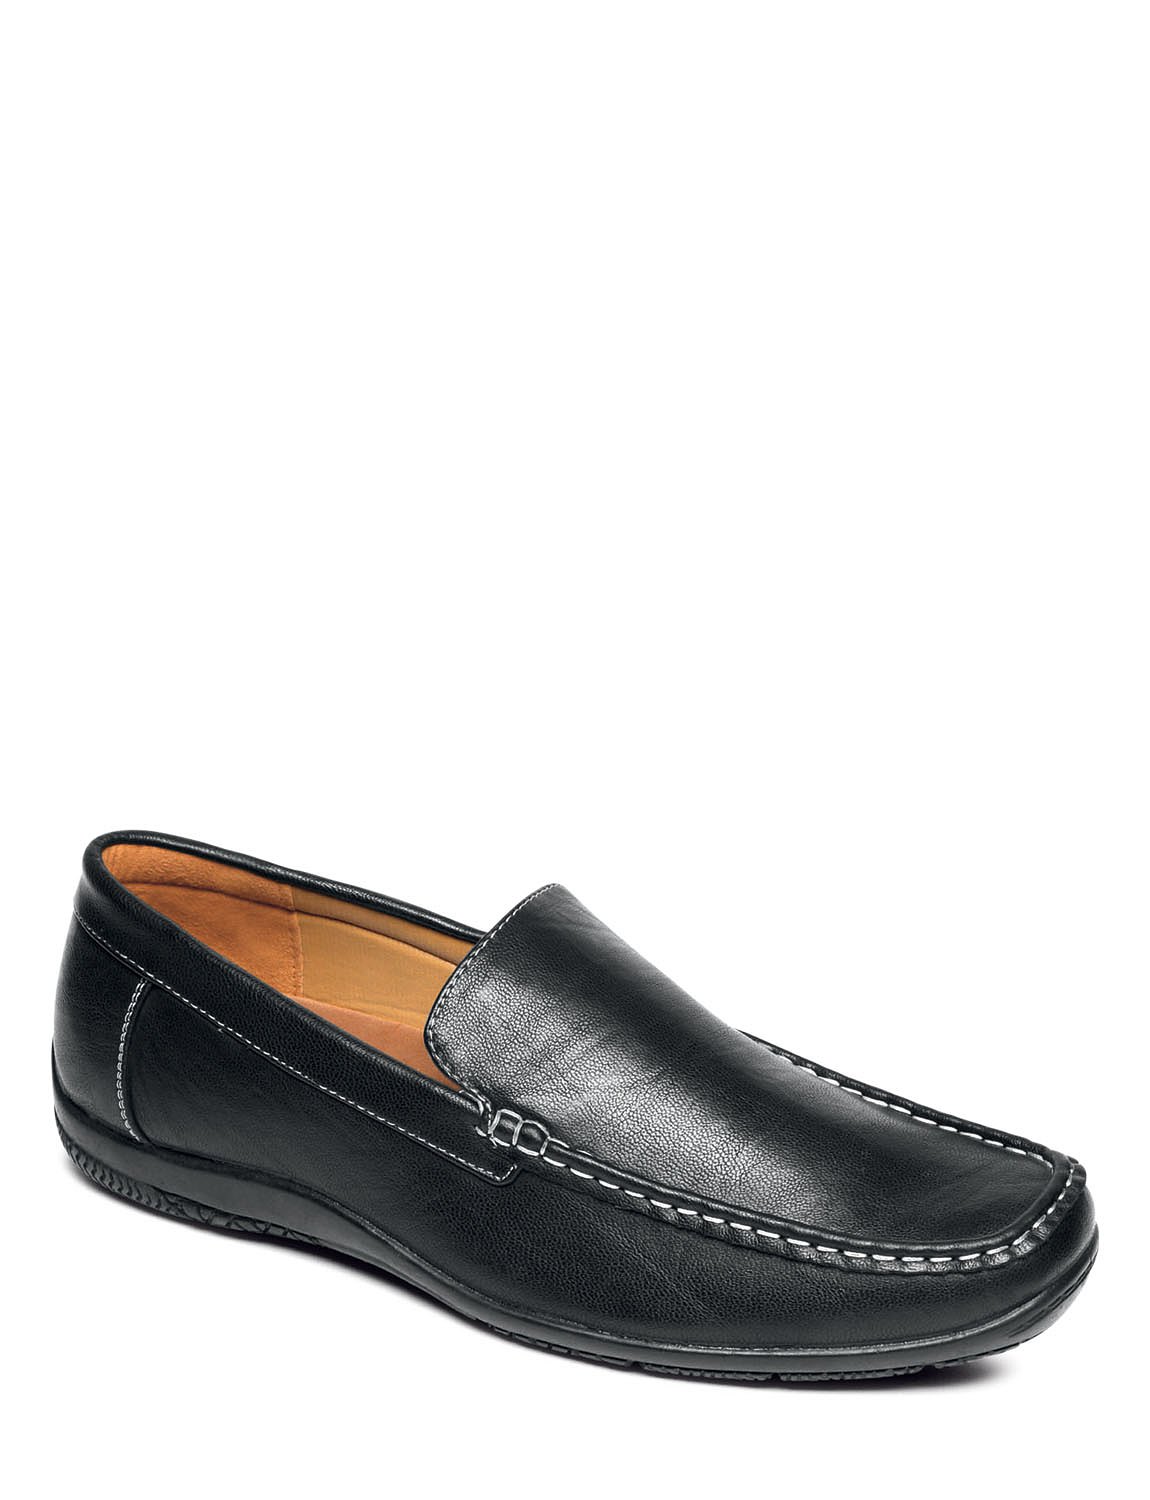 mens slip on leather loafers